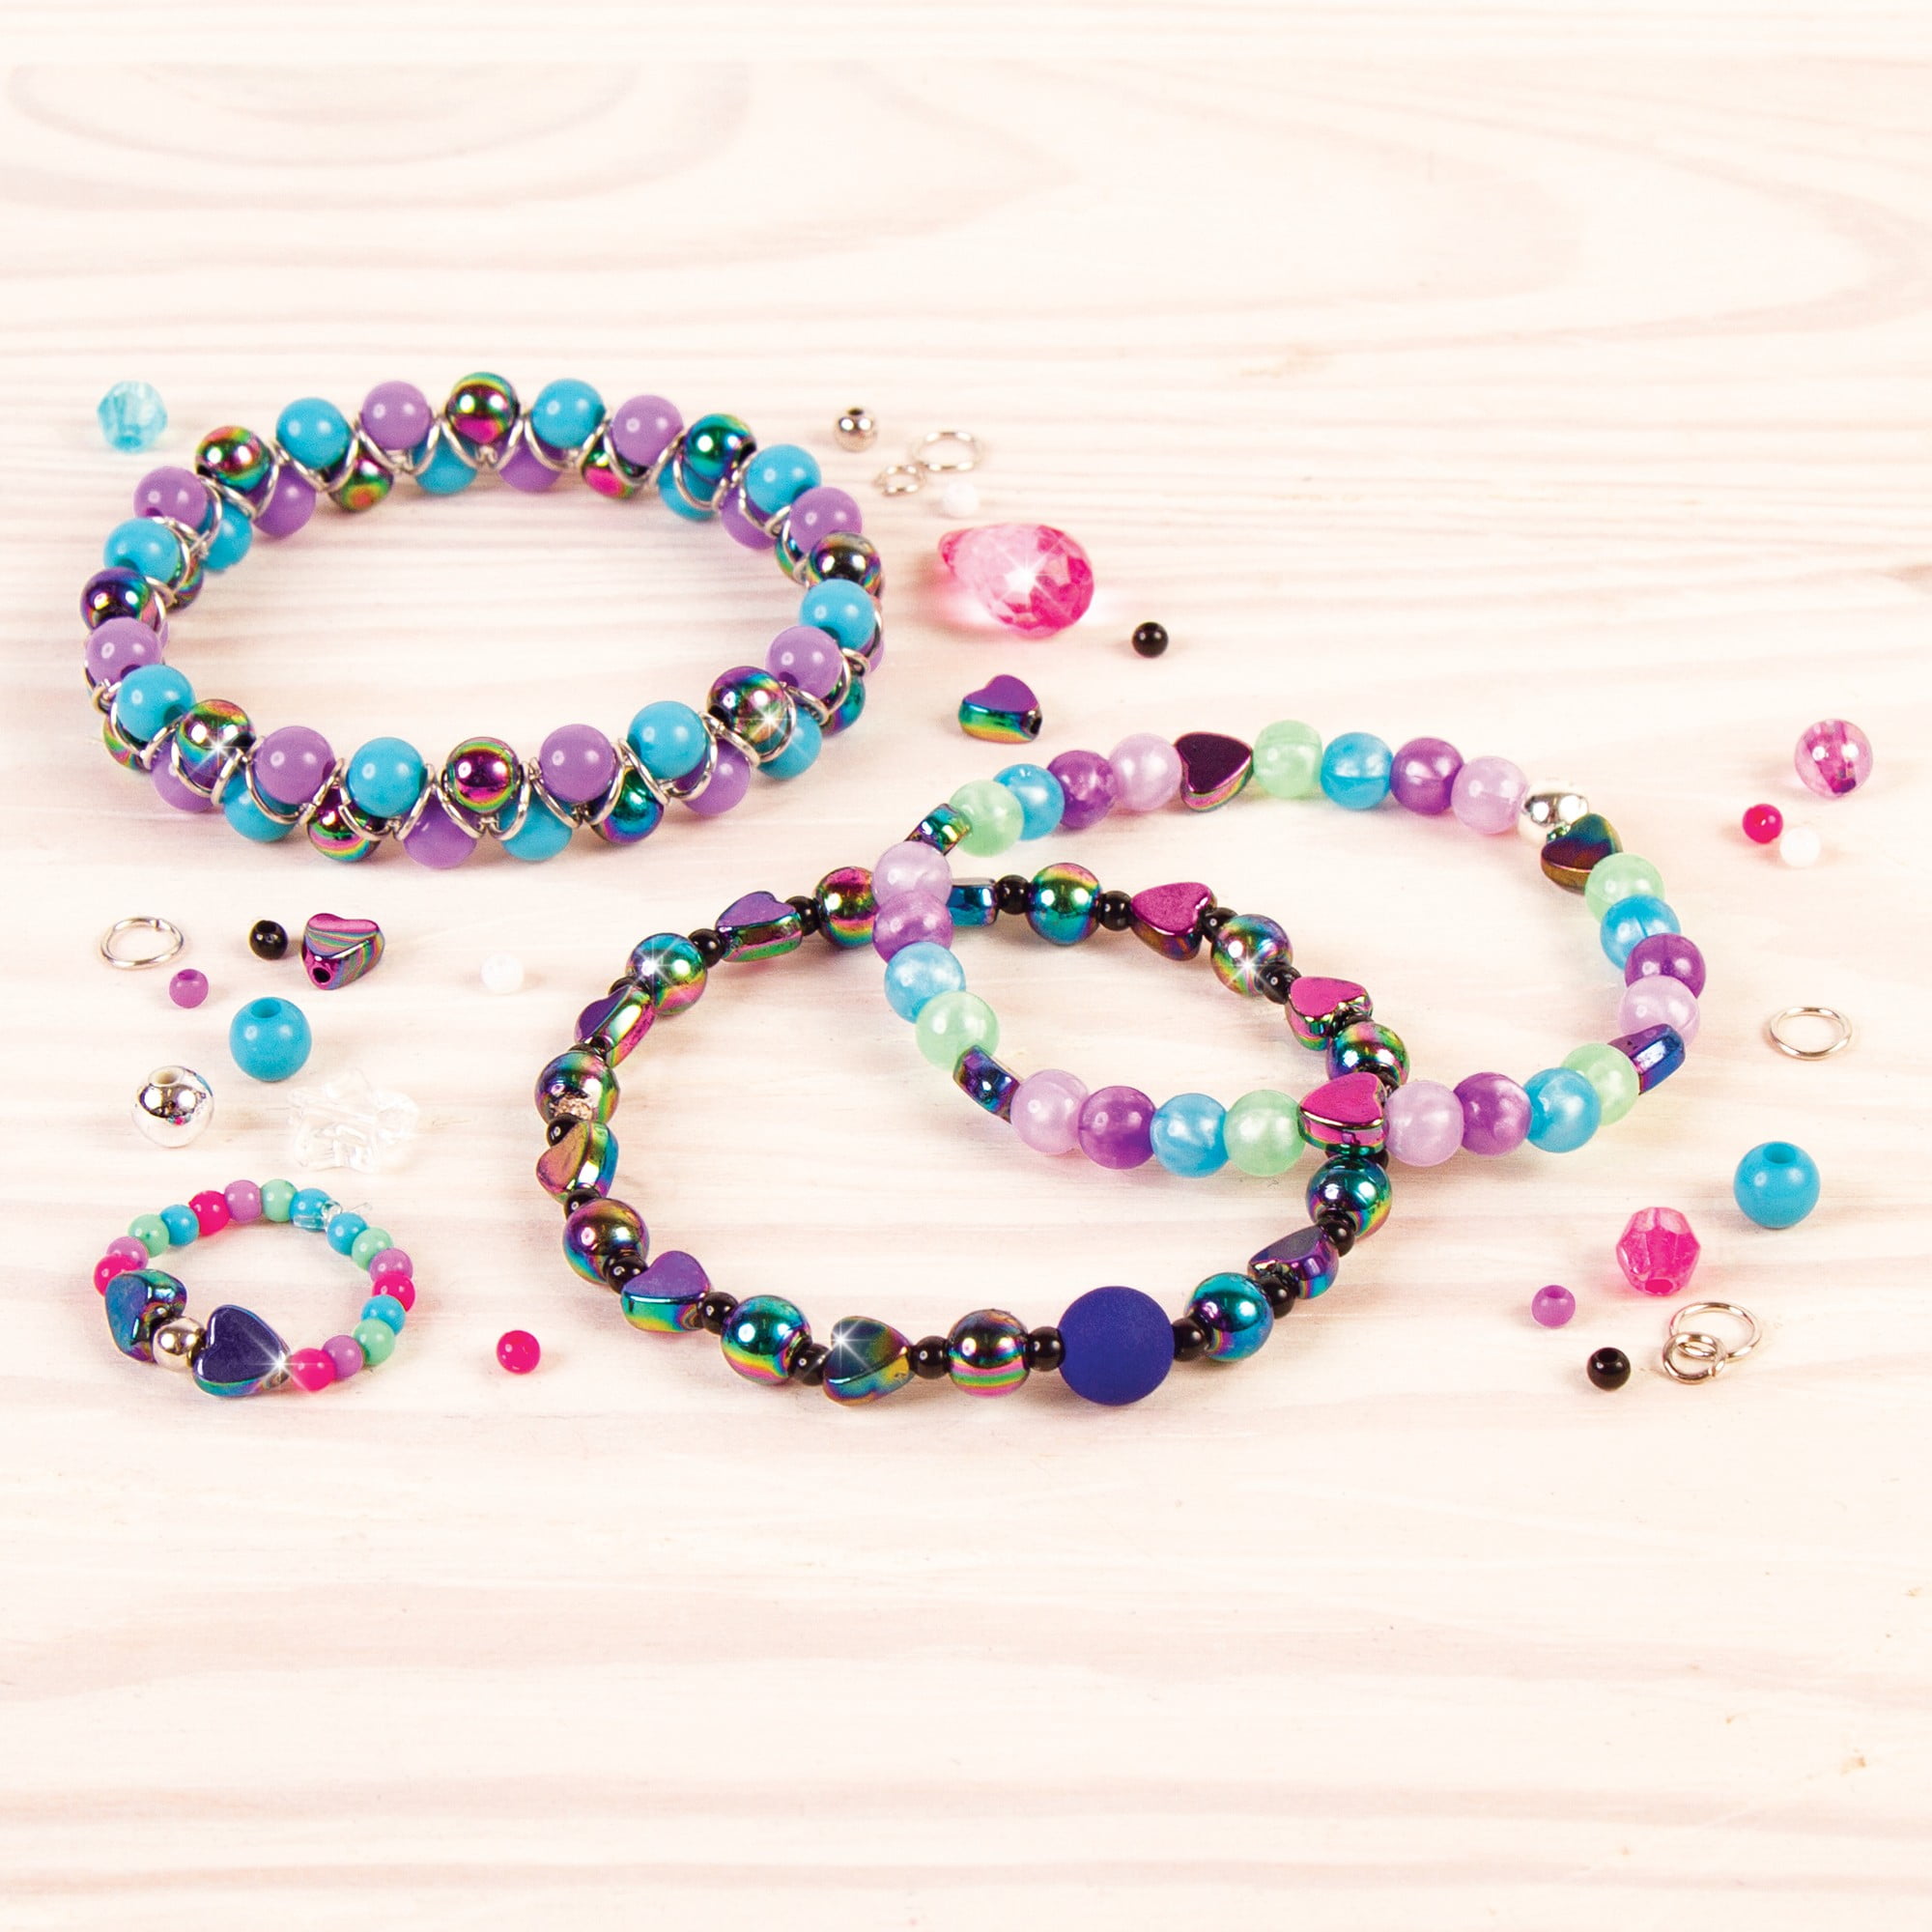 Make It Real - Ultimate Bead Studio. DIY Tween Girls Beaded Jewelry Making  Kit. Arts and Crafts Kit Guides Kids to Design and Create Beautiful  Bracelets, Necklaces, Rings and Headbands : 